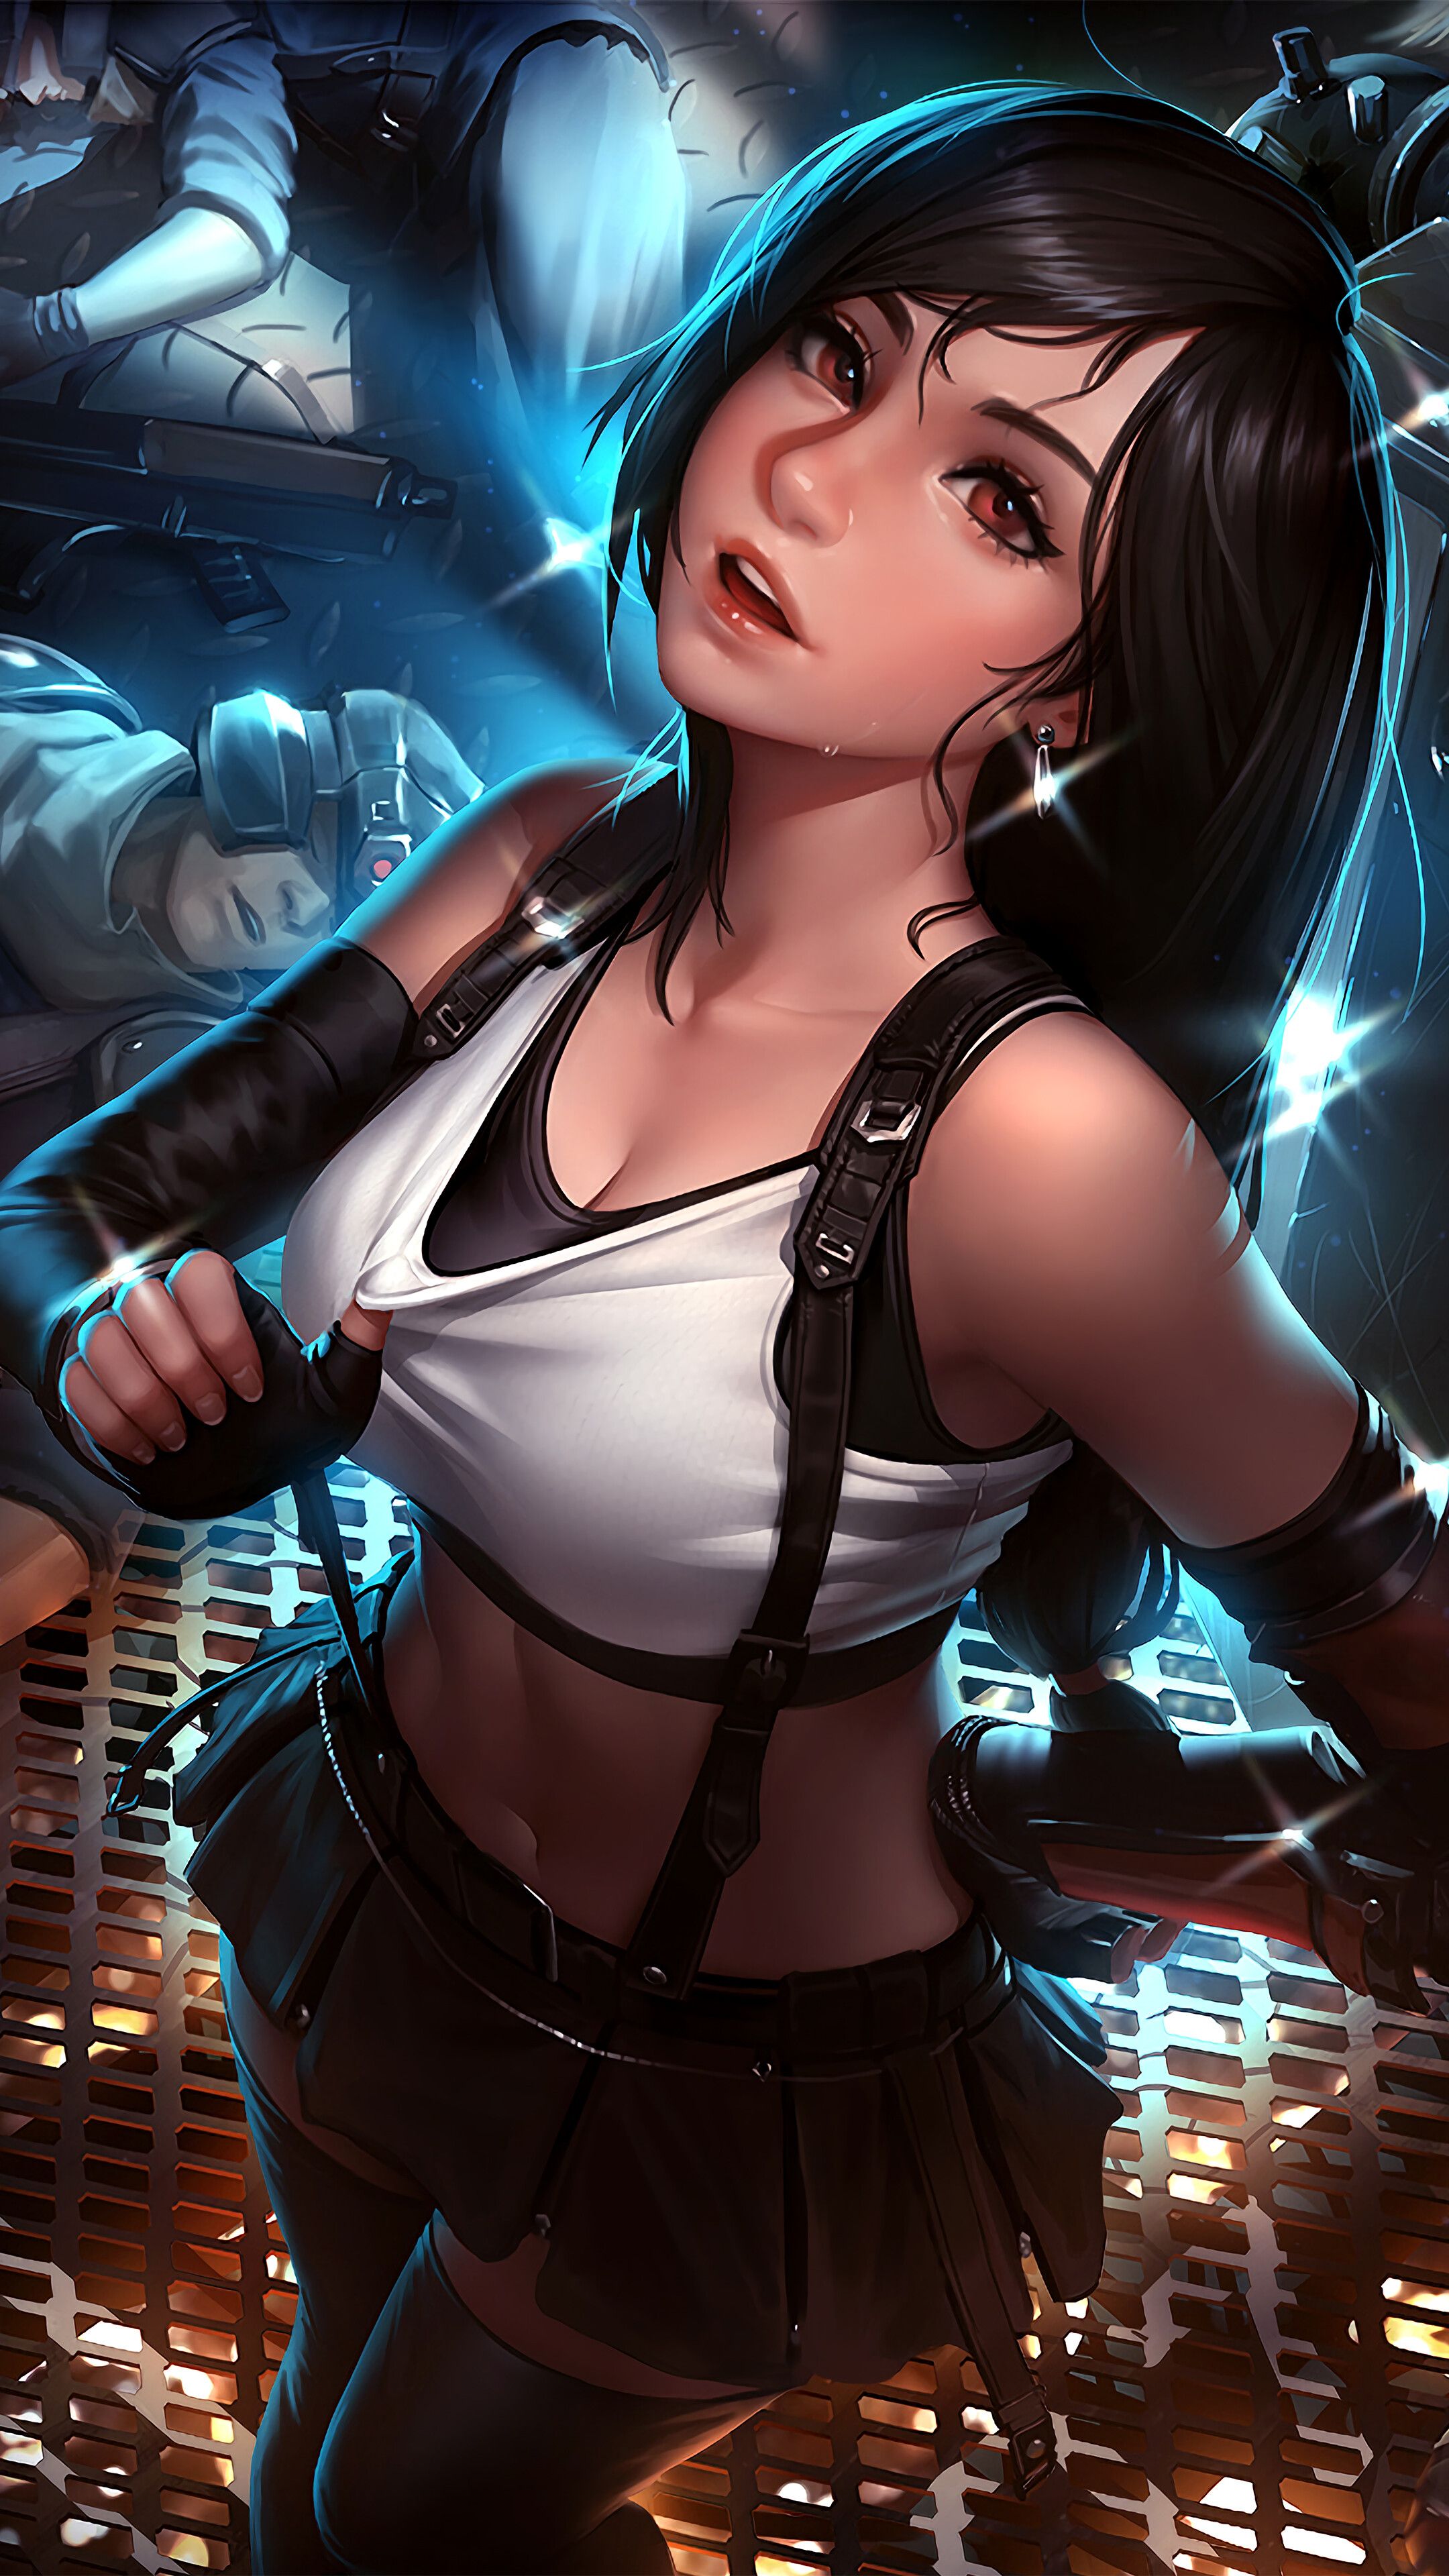 Tifa, Final Fantasy 7 Remake, 4K phone HD Wallpaper, Image, Background, Photo and Picture HD Wallpaper